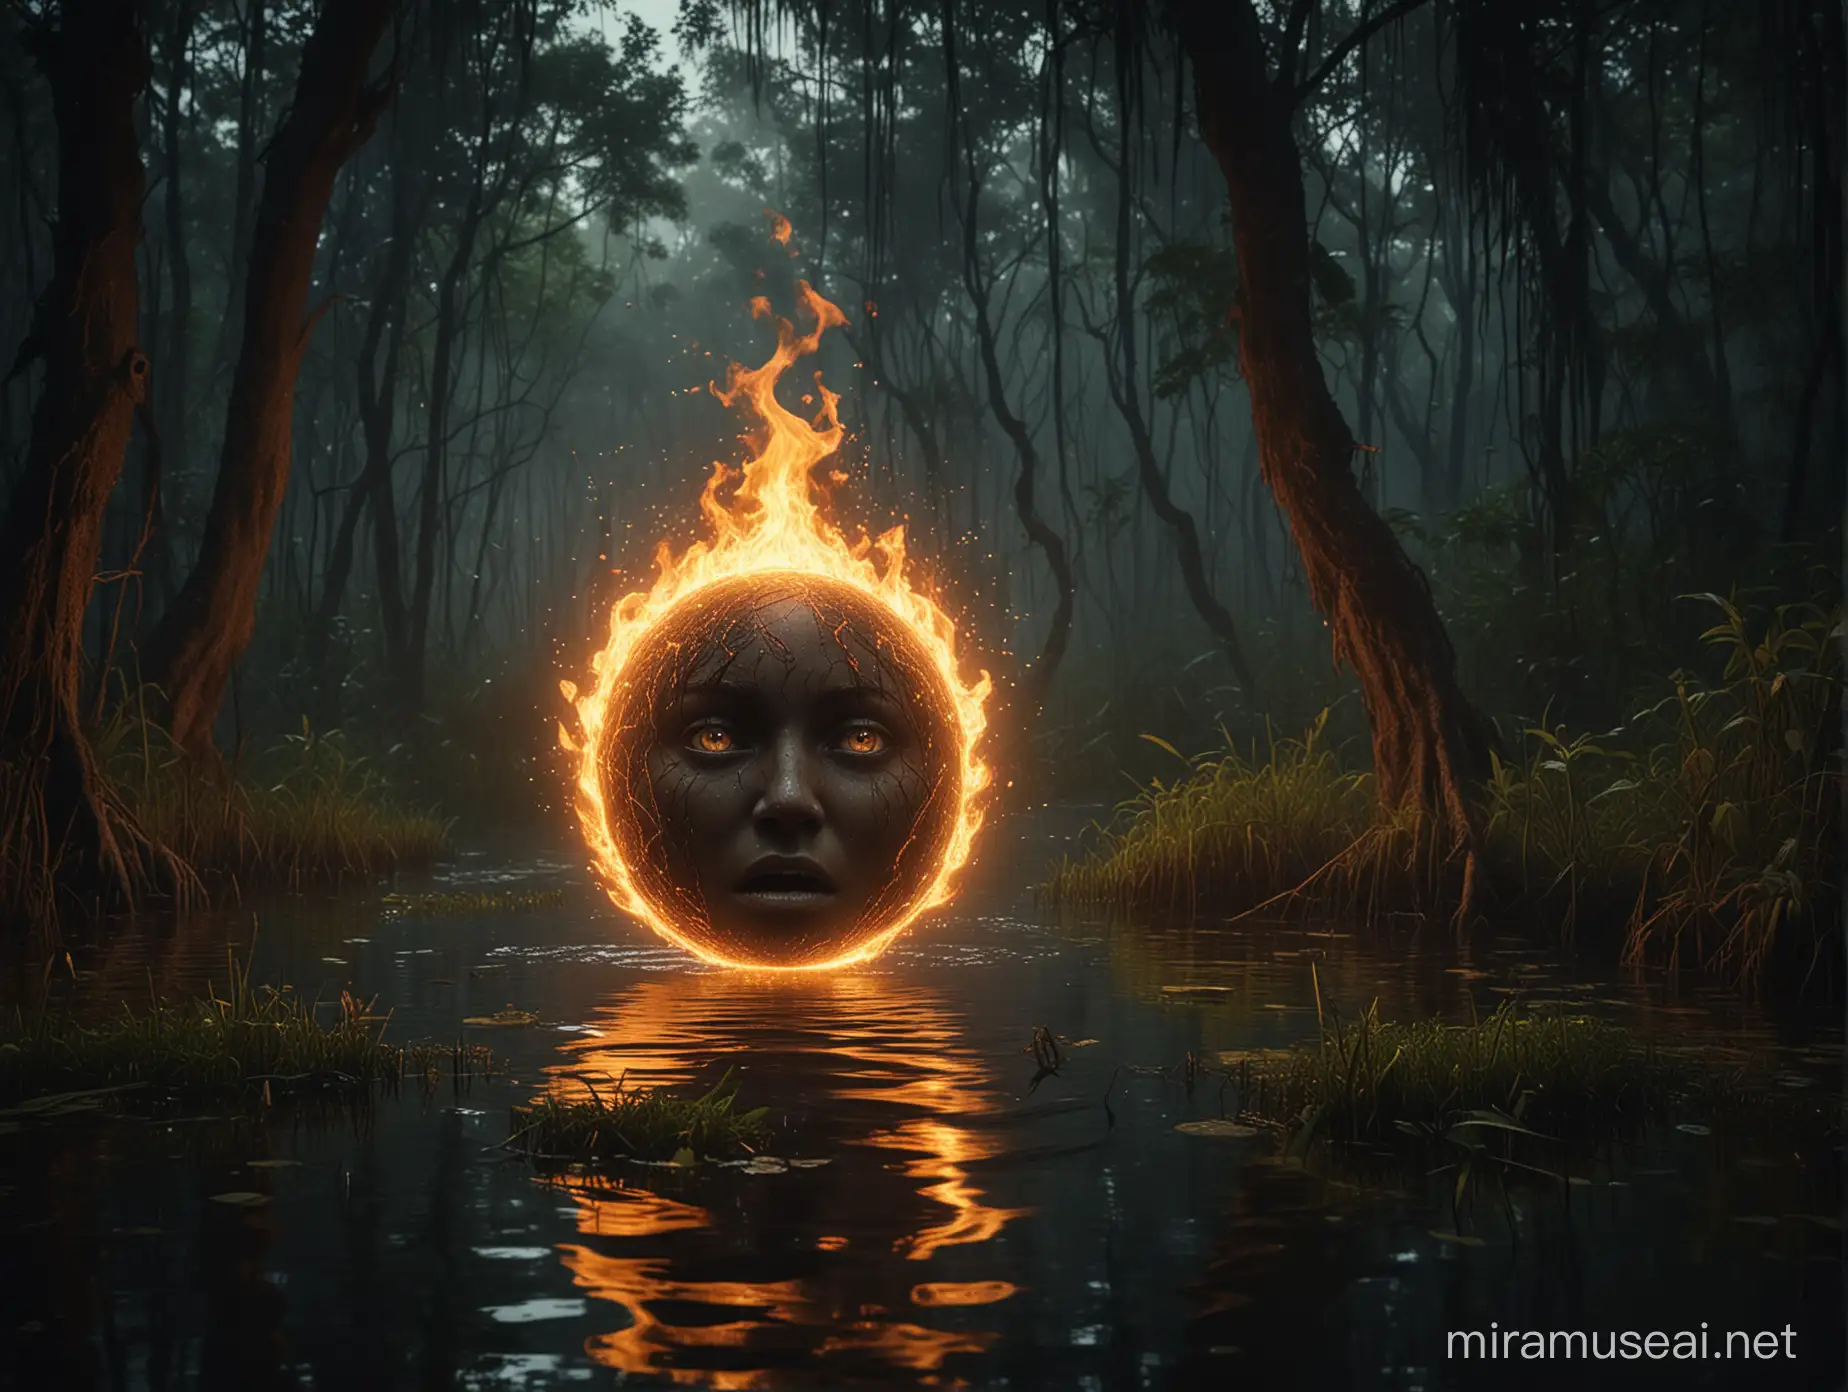 A mysterious floating ball of fire with a human face with an anguished expression, hovering over a swamp in the jungle at night, mystical, cinematic